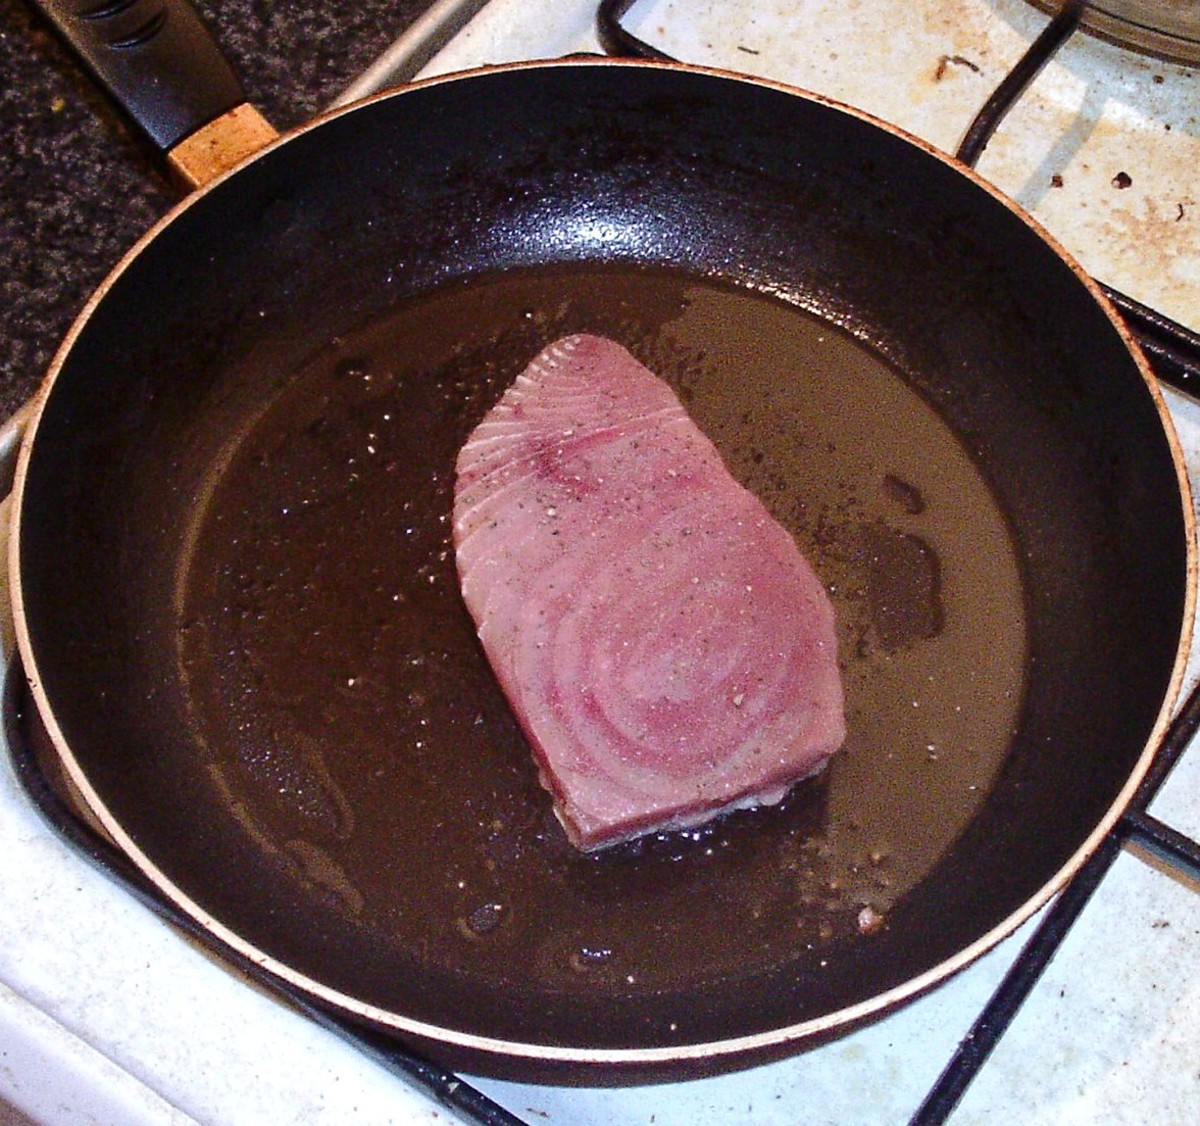 Tuna fillet is added to searingly hot frying pan.